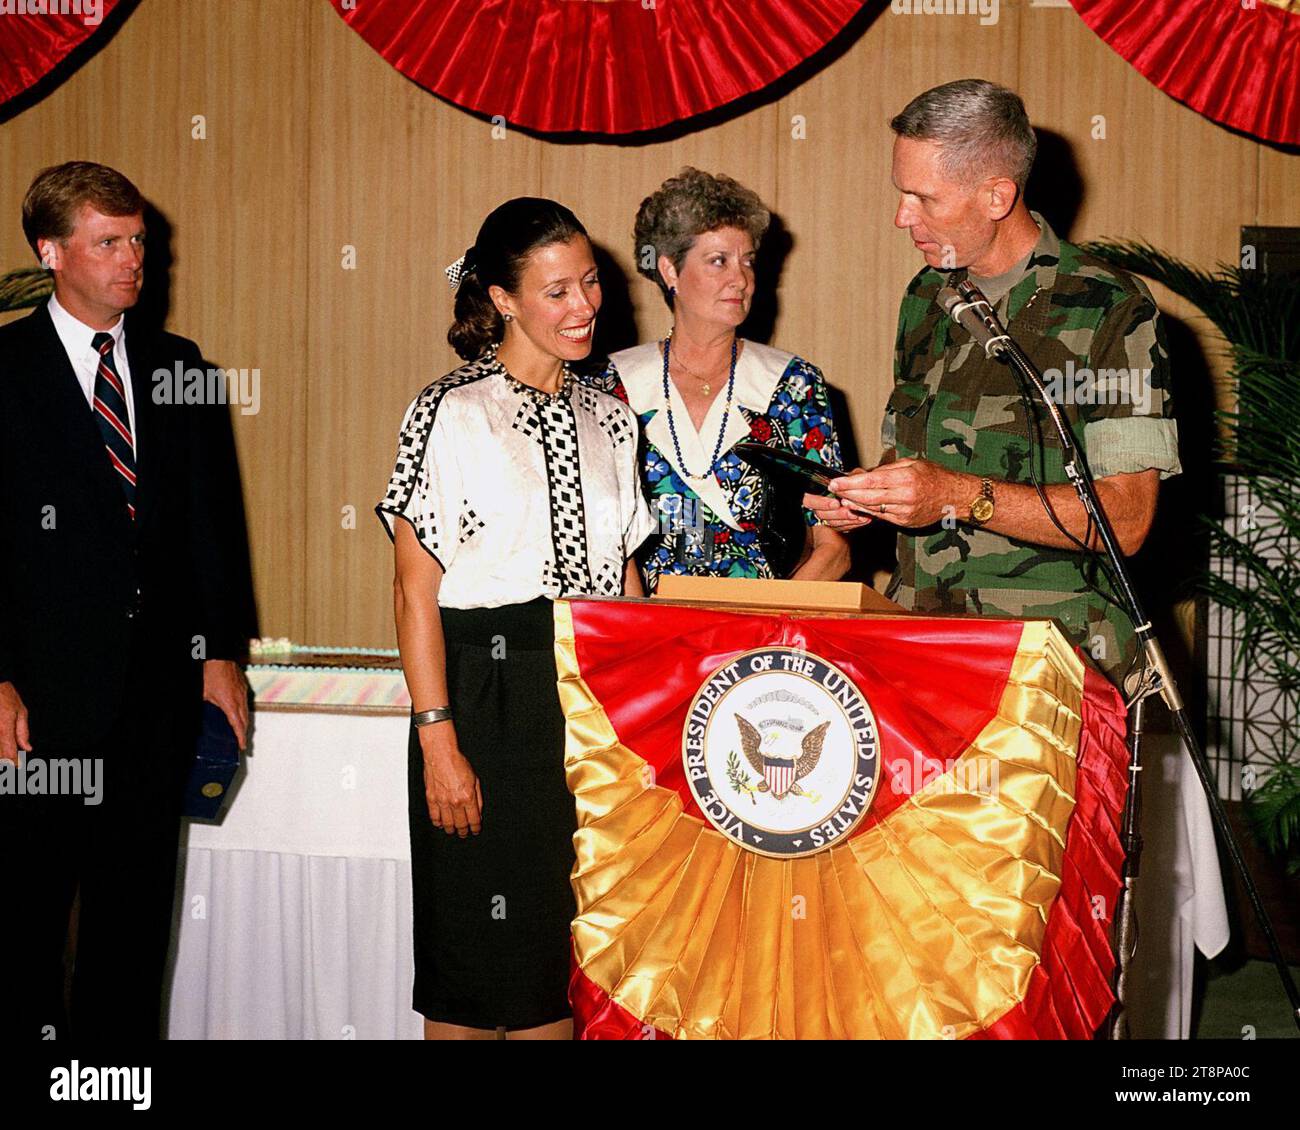 Vice President Dan Quayle looks as his wife, Marilyn Quayle accepts a gift from Lieutenant General Norman H. Smith. Stock Photo